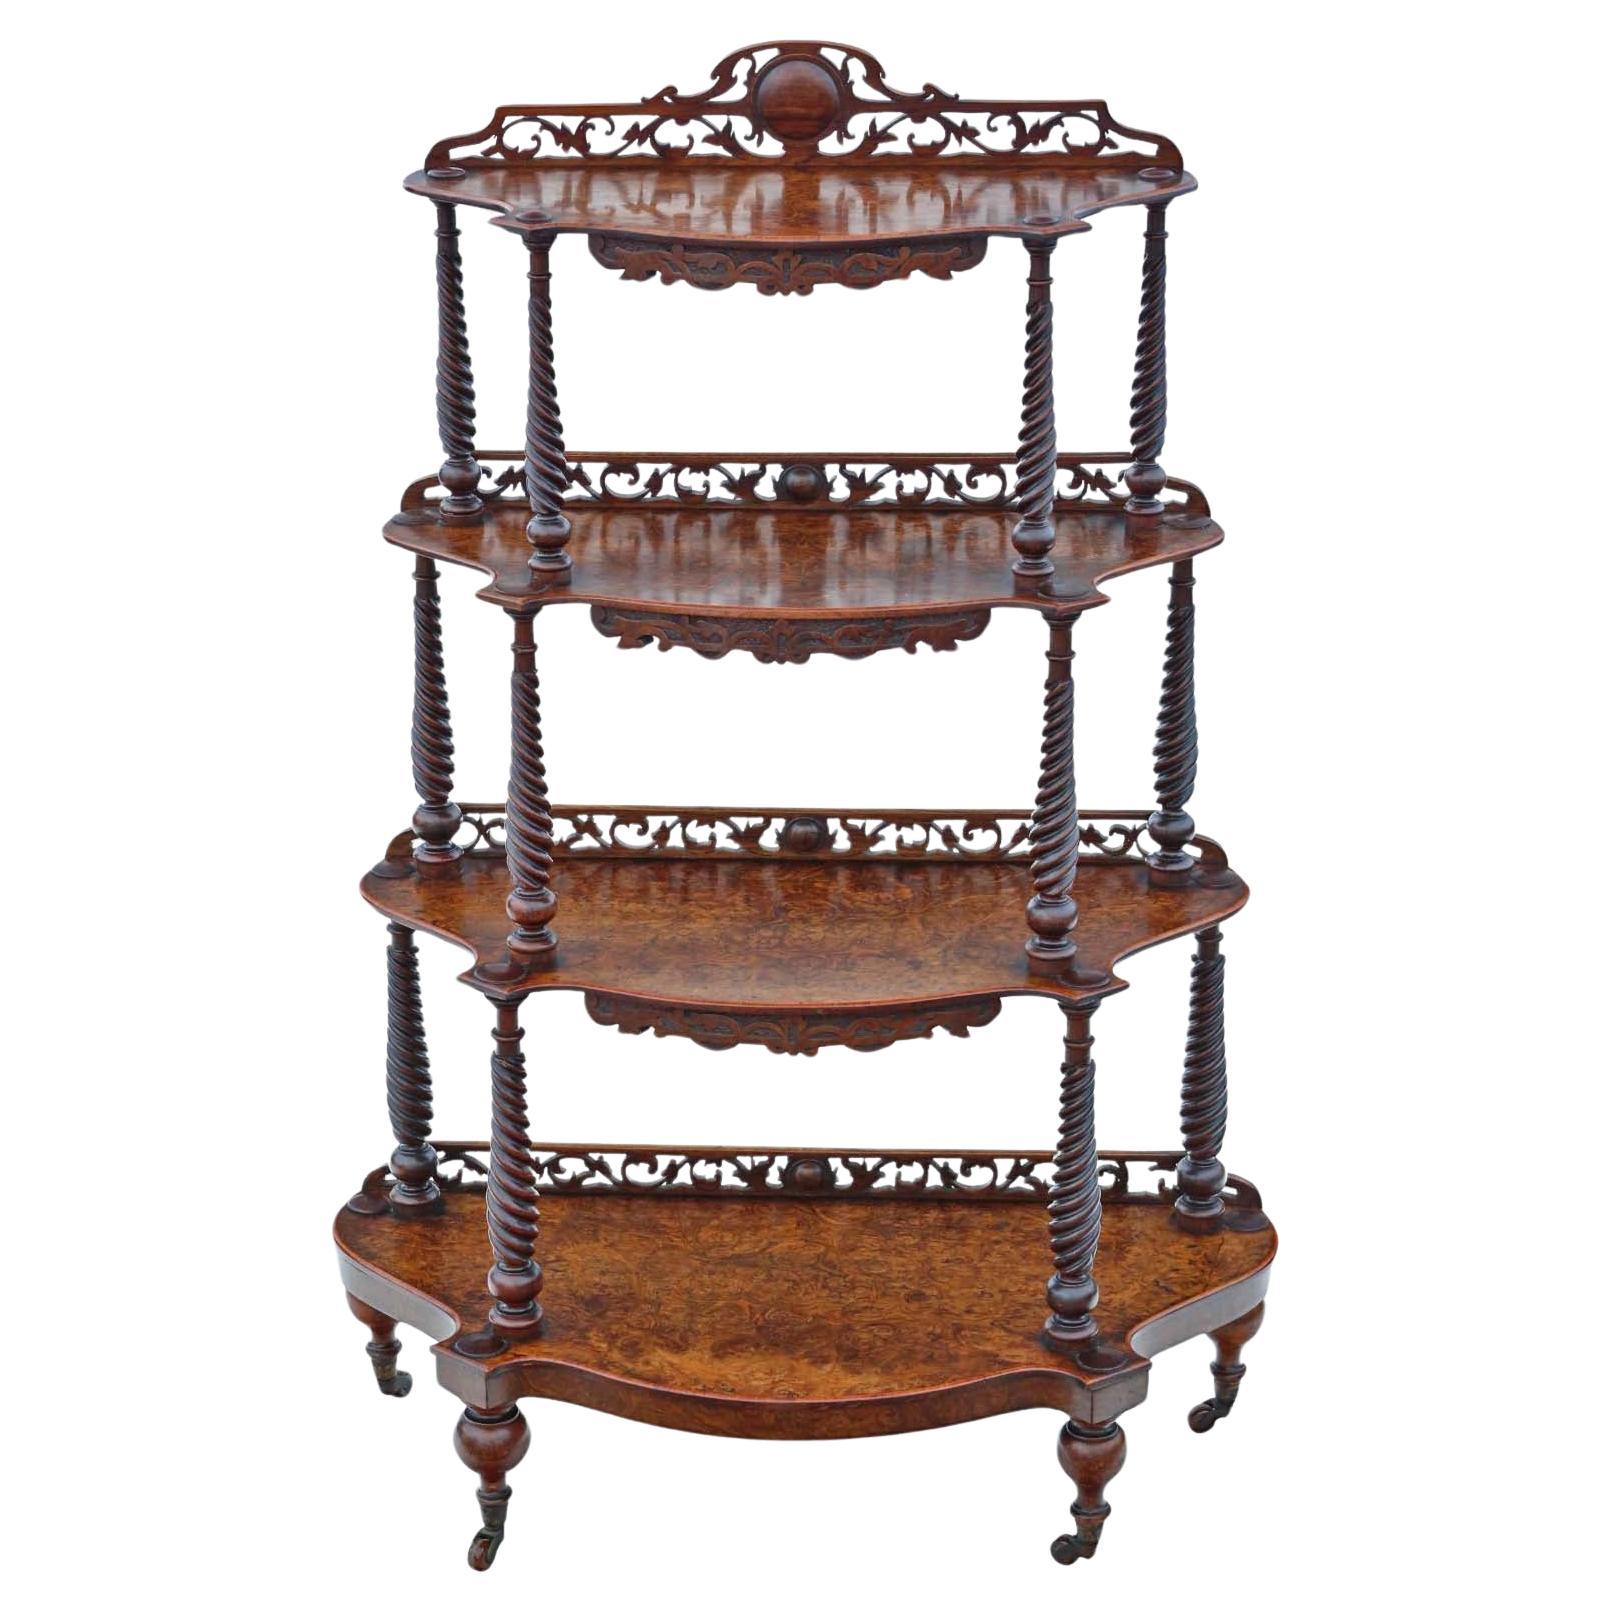 19th Century Burr Walnut Demi-Lune Console Table Quality Antique display serving For Sale